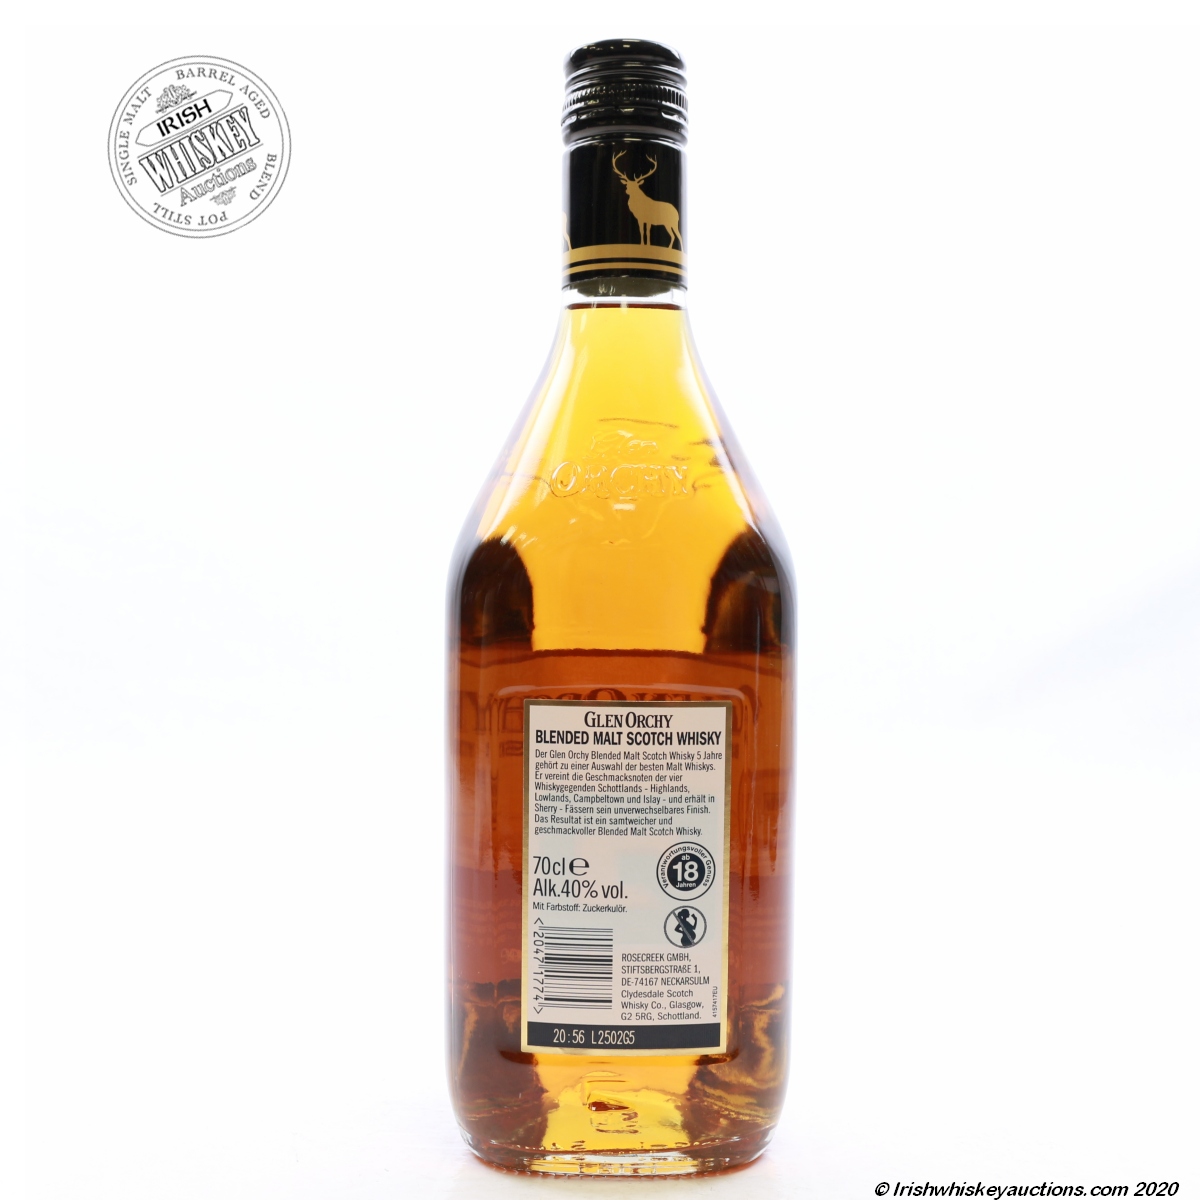 Irish Whiskey Auctions | Glen Orchy 5 Year Old Blended Malt Scotch Whisky